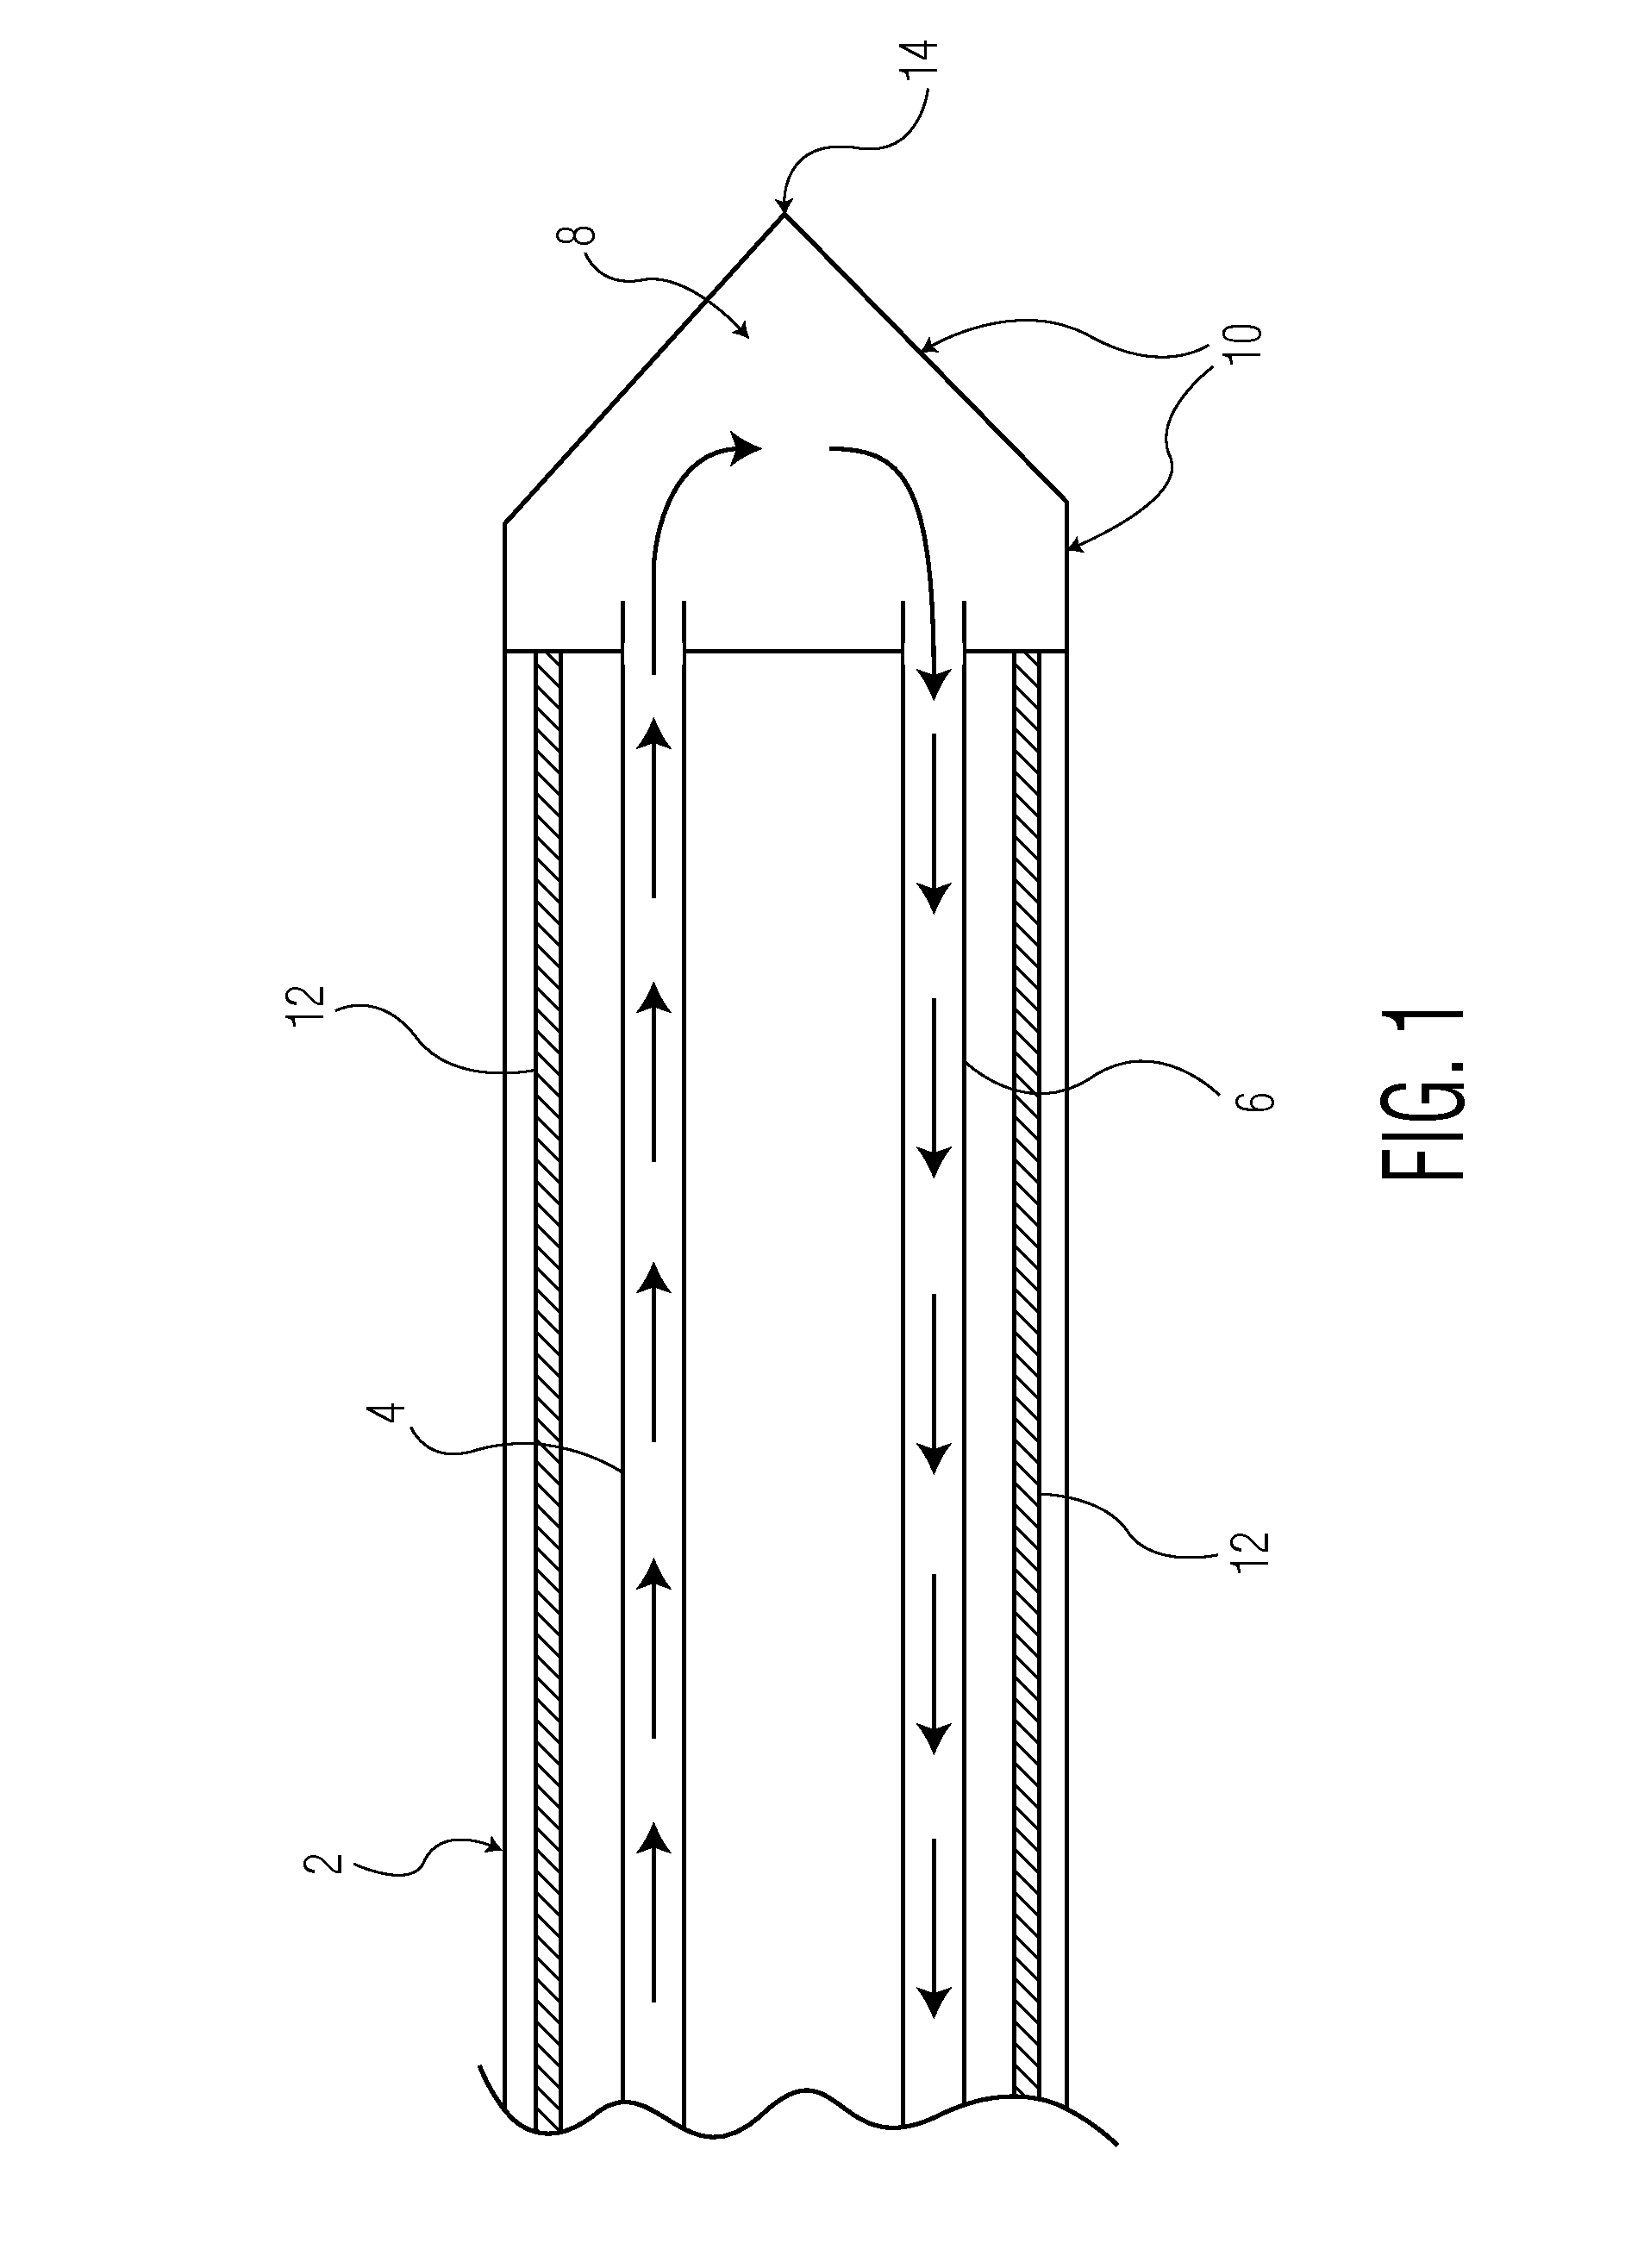 Cryogenic system and methods